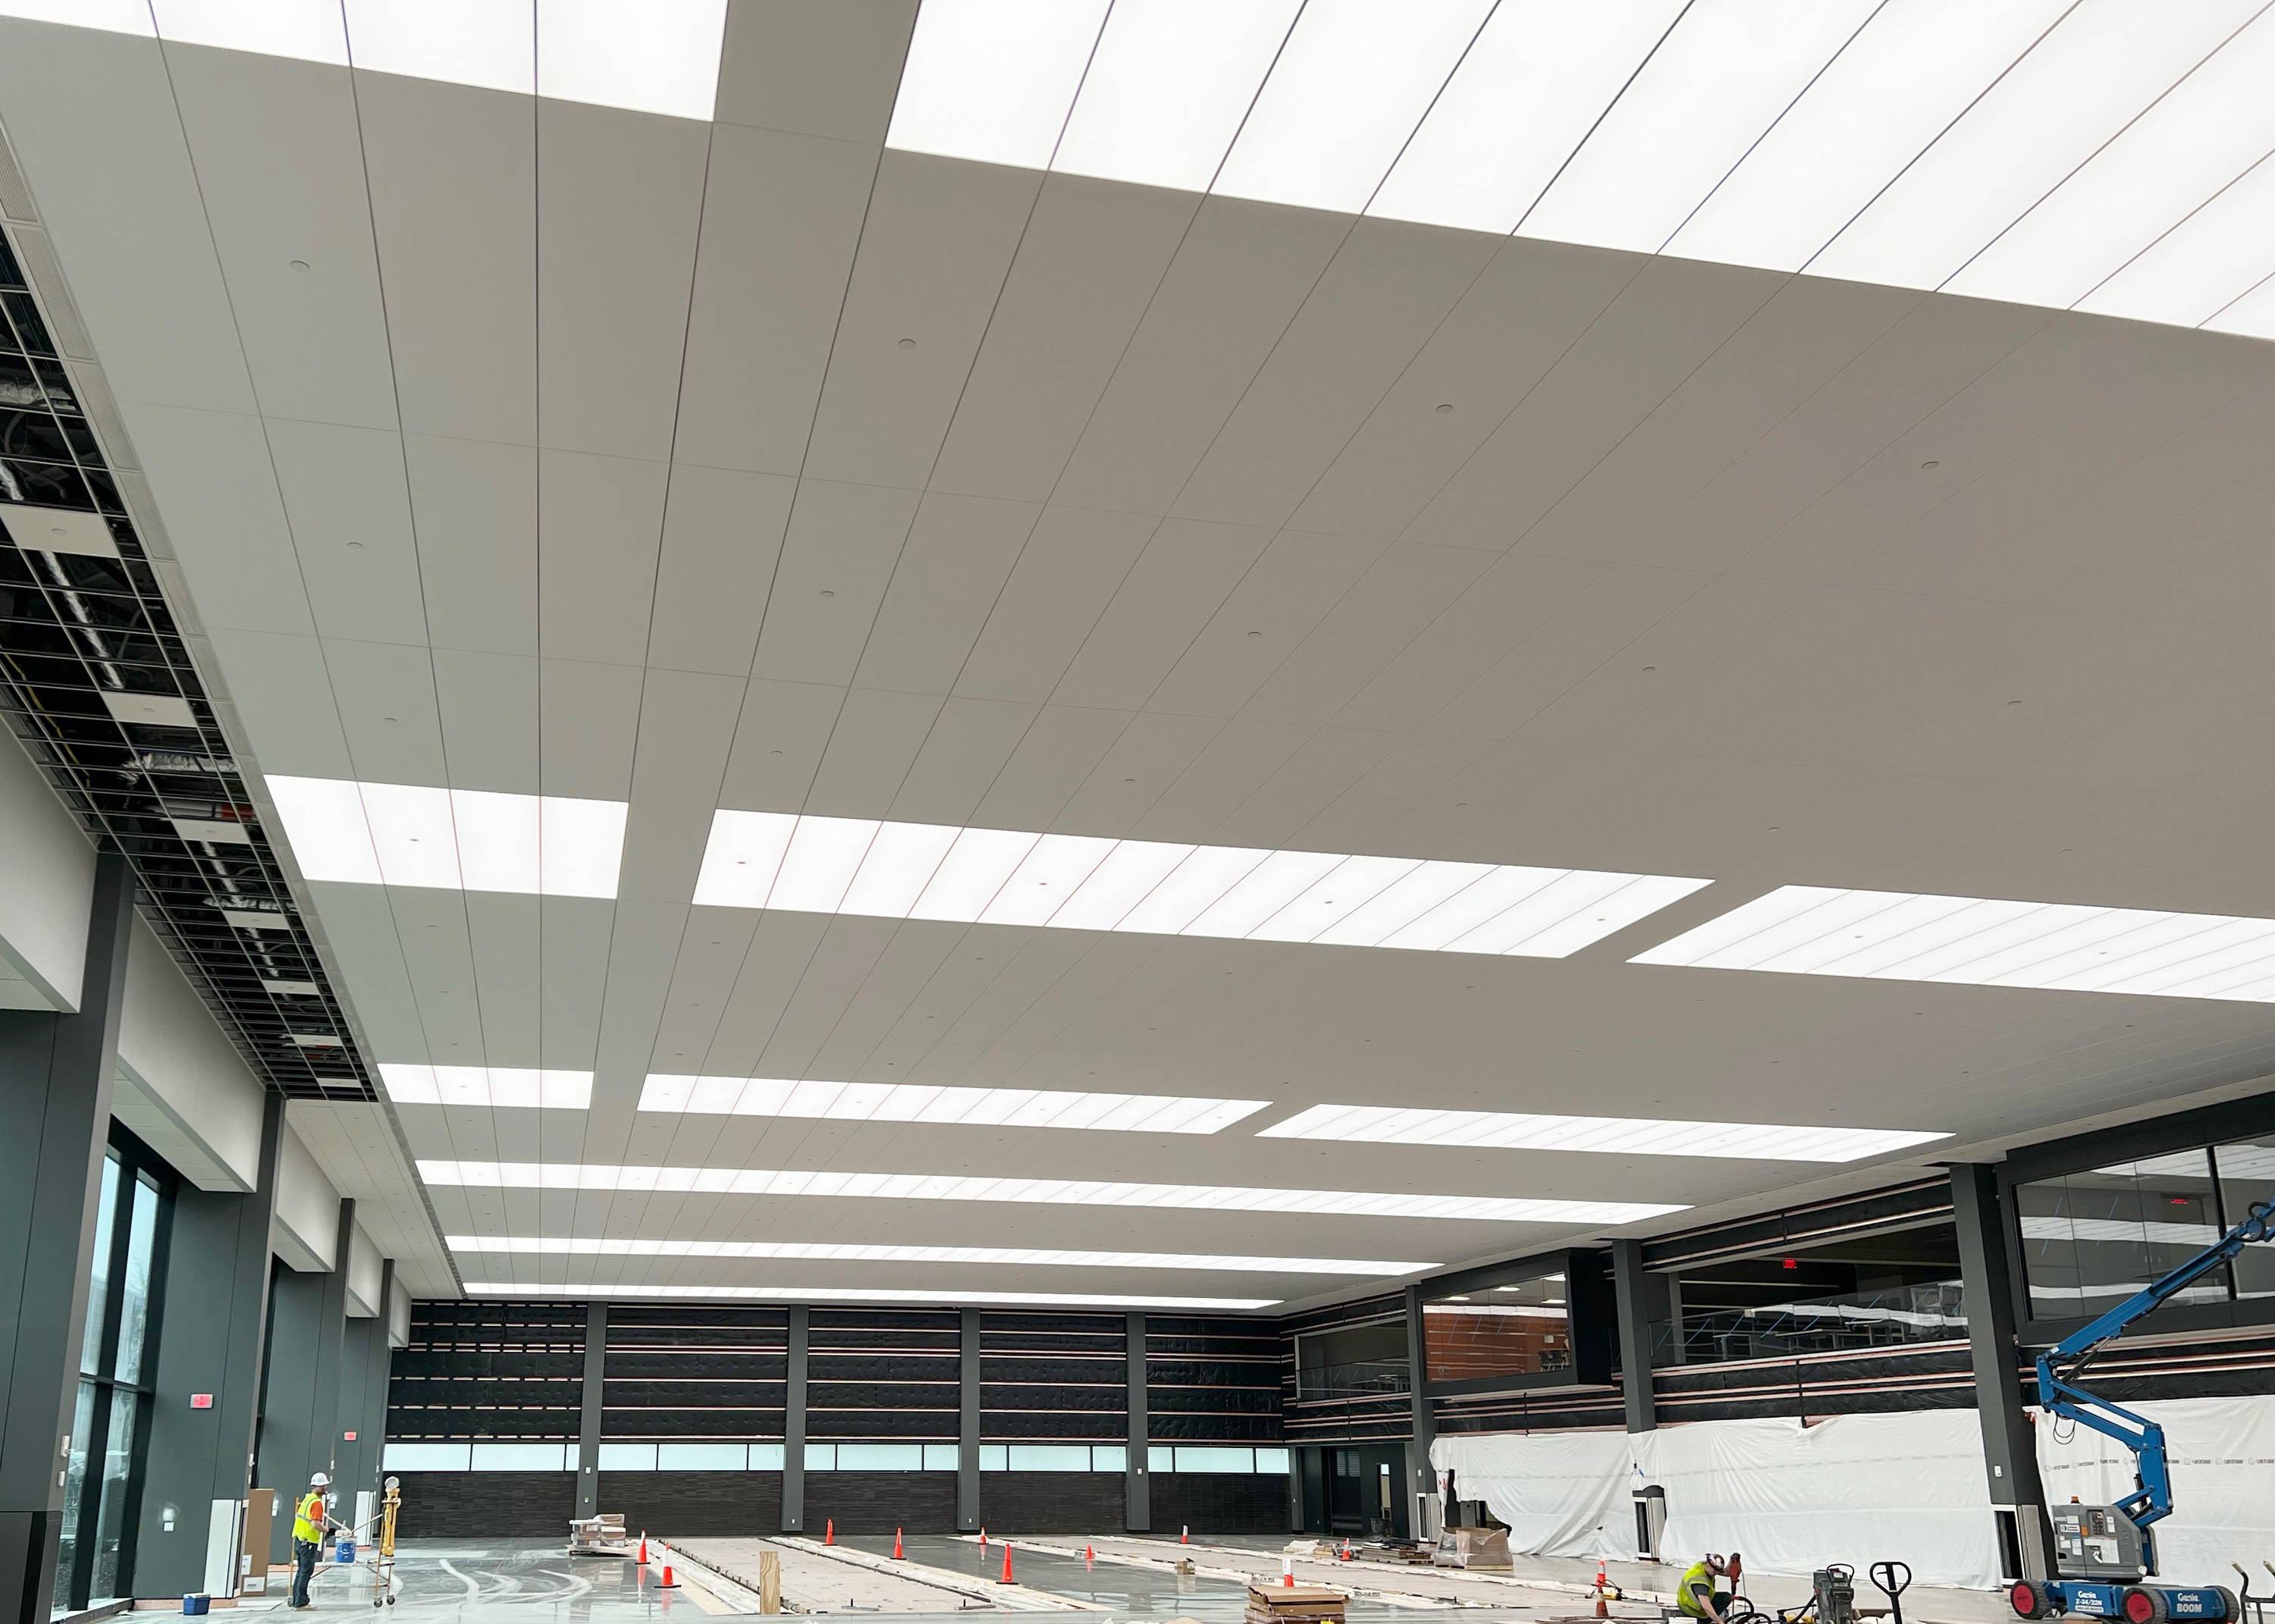 Data Center interstitial ceiling grid supporting large ceiling and light installation